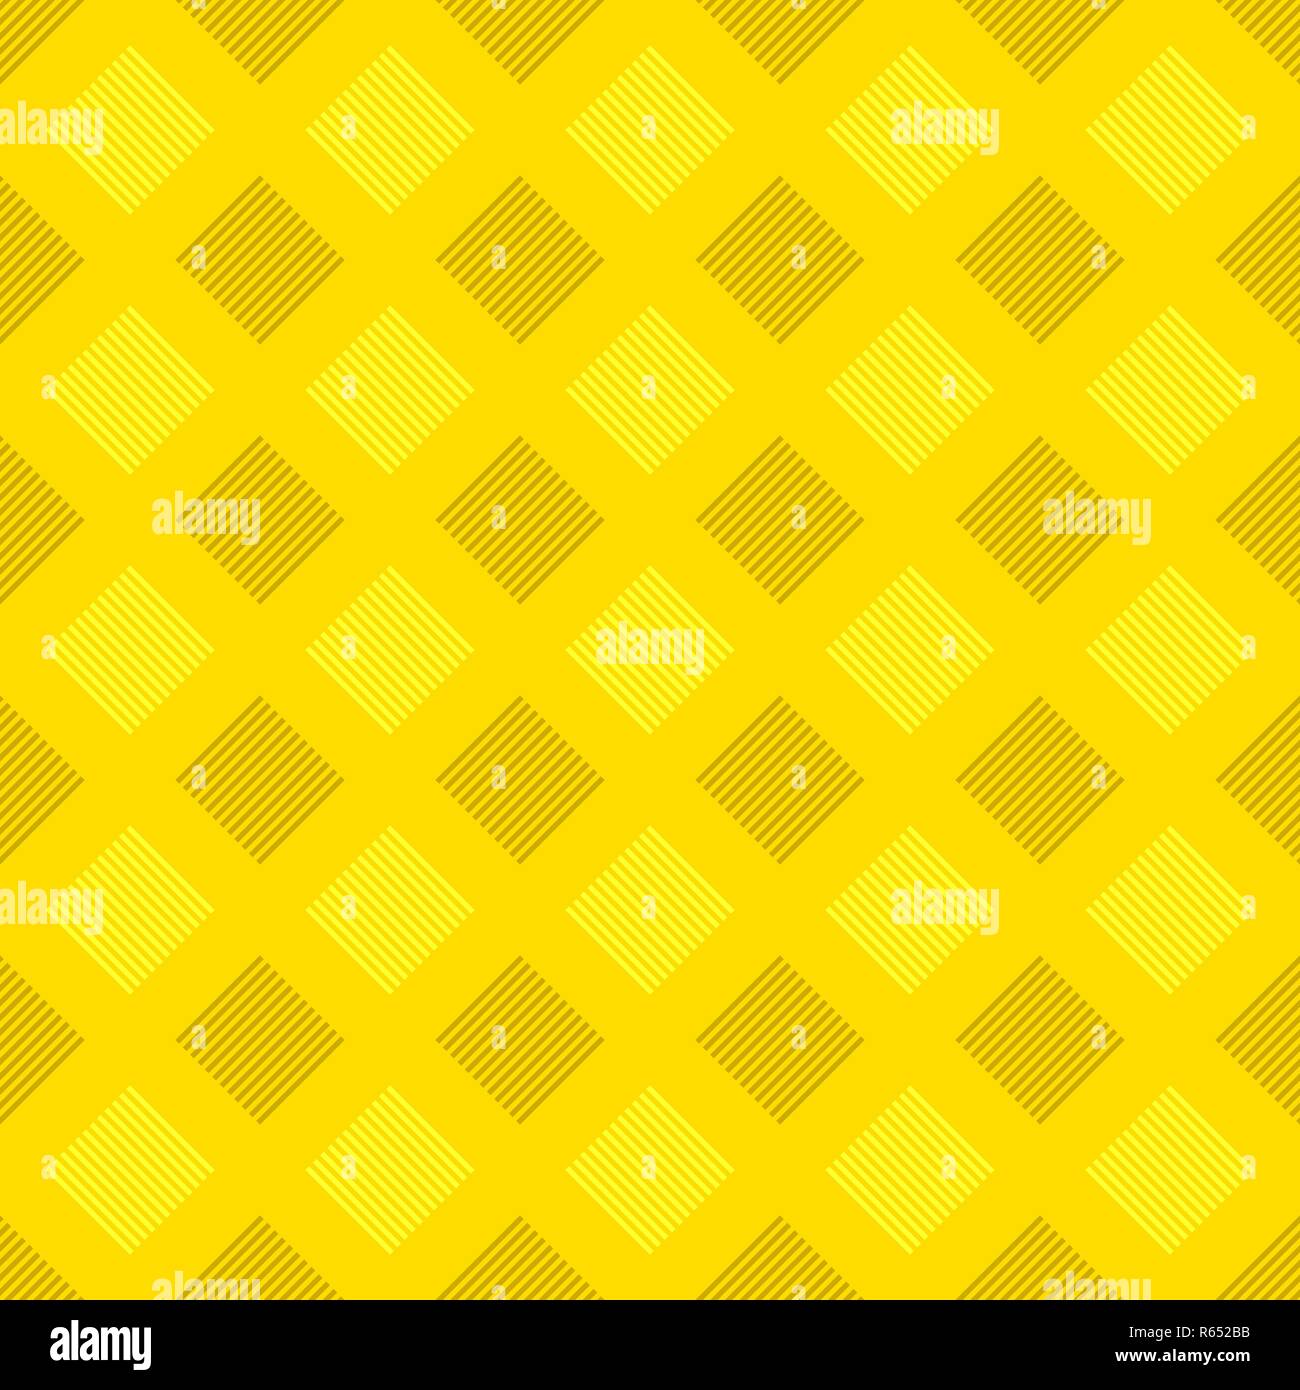 Seamless geometrical square pattern design background - vector graphic Stock Vector